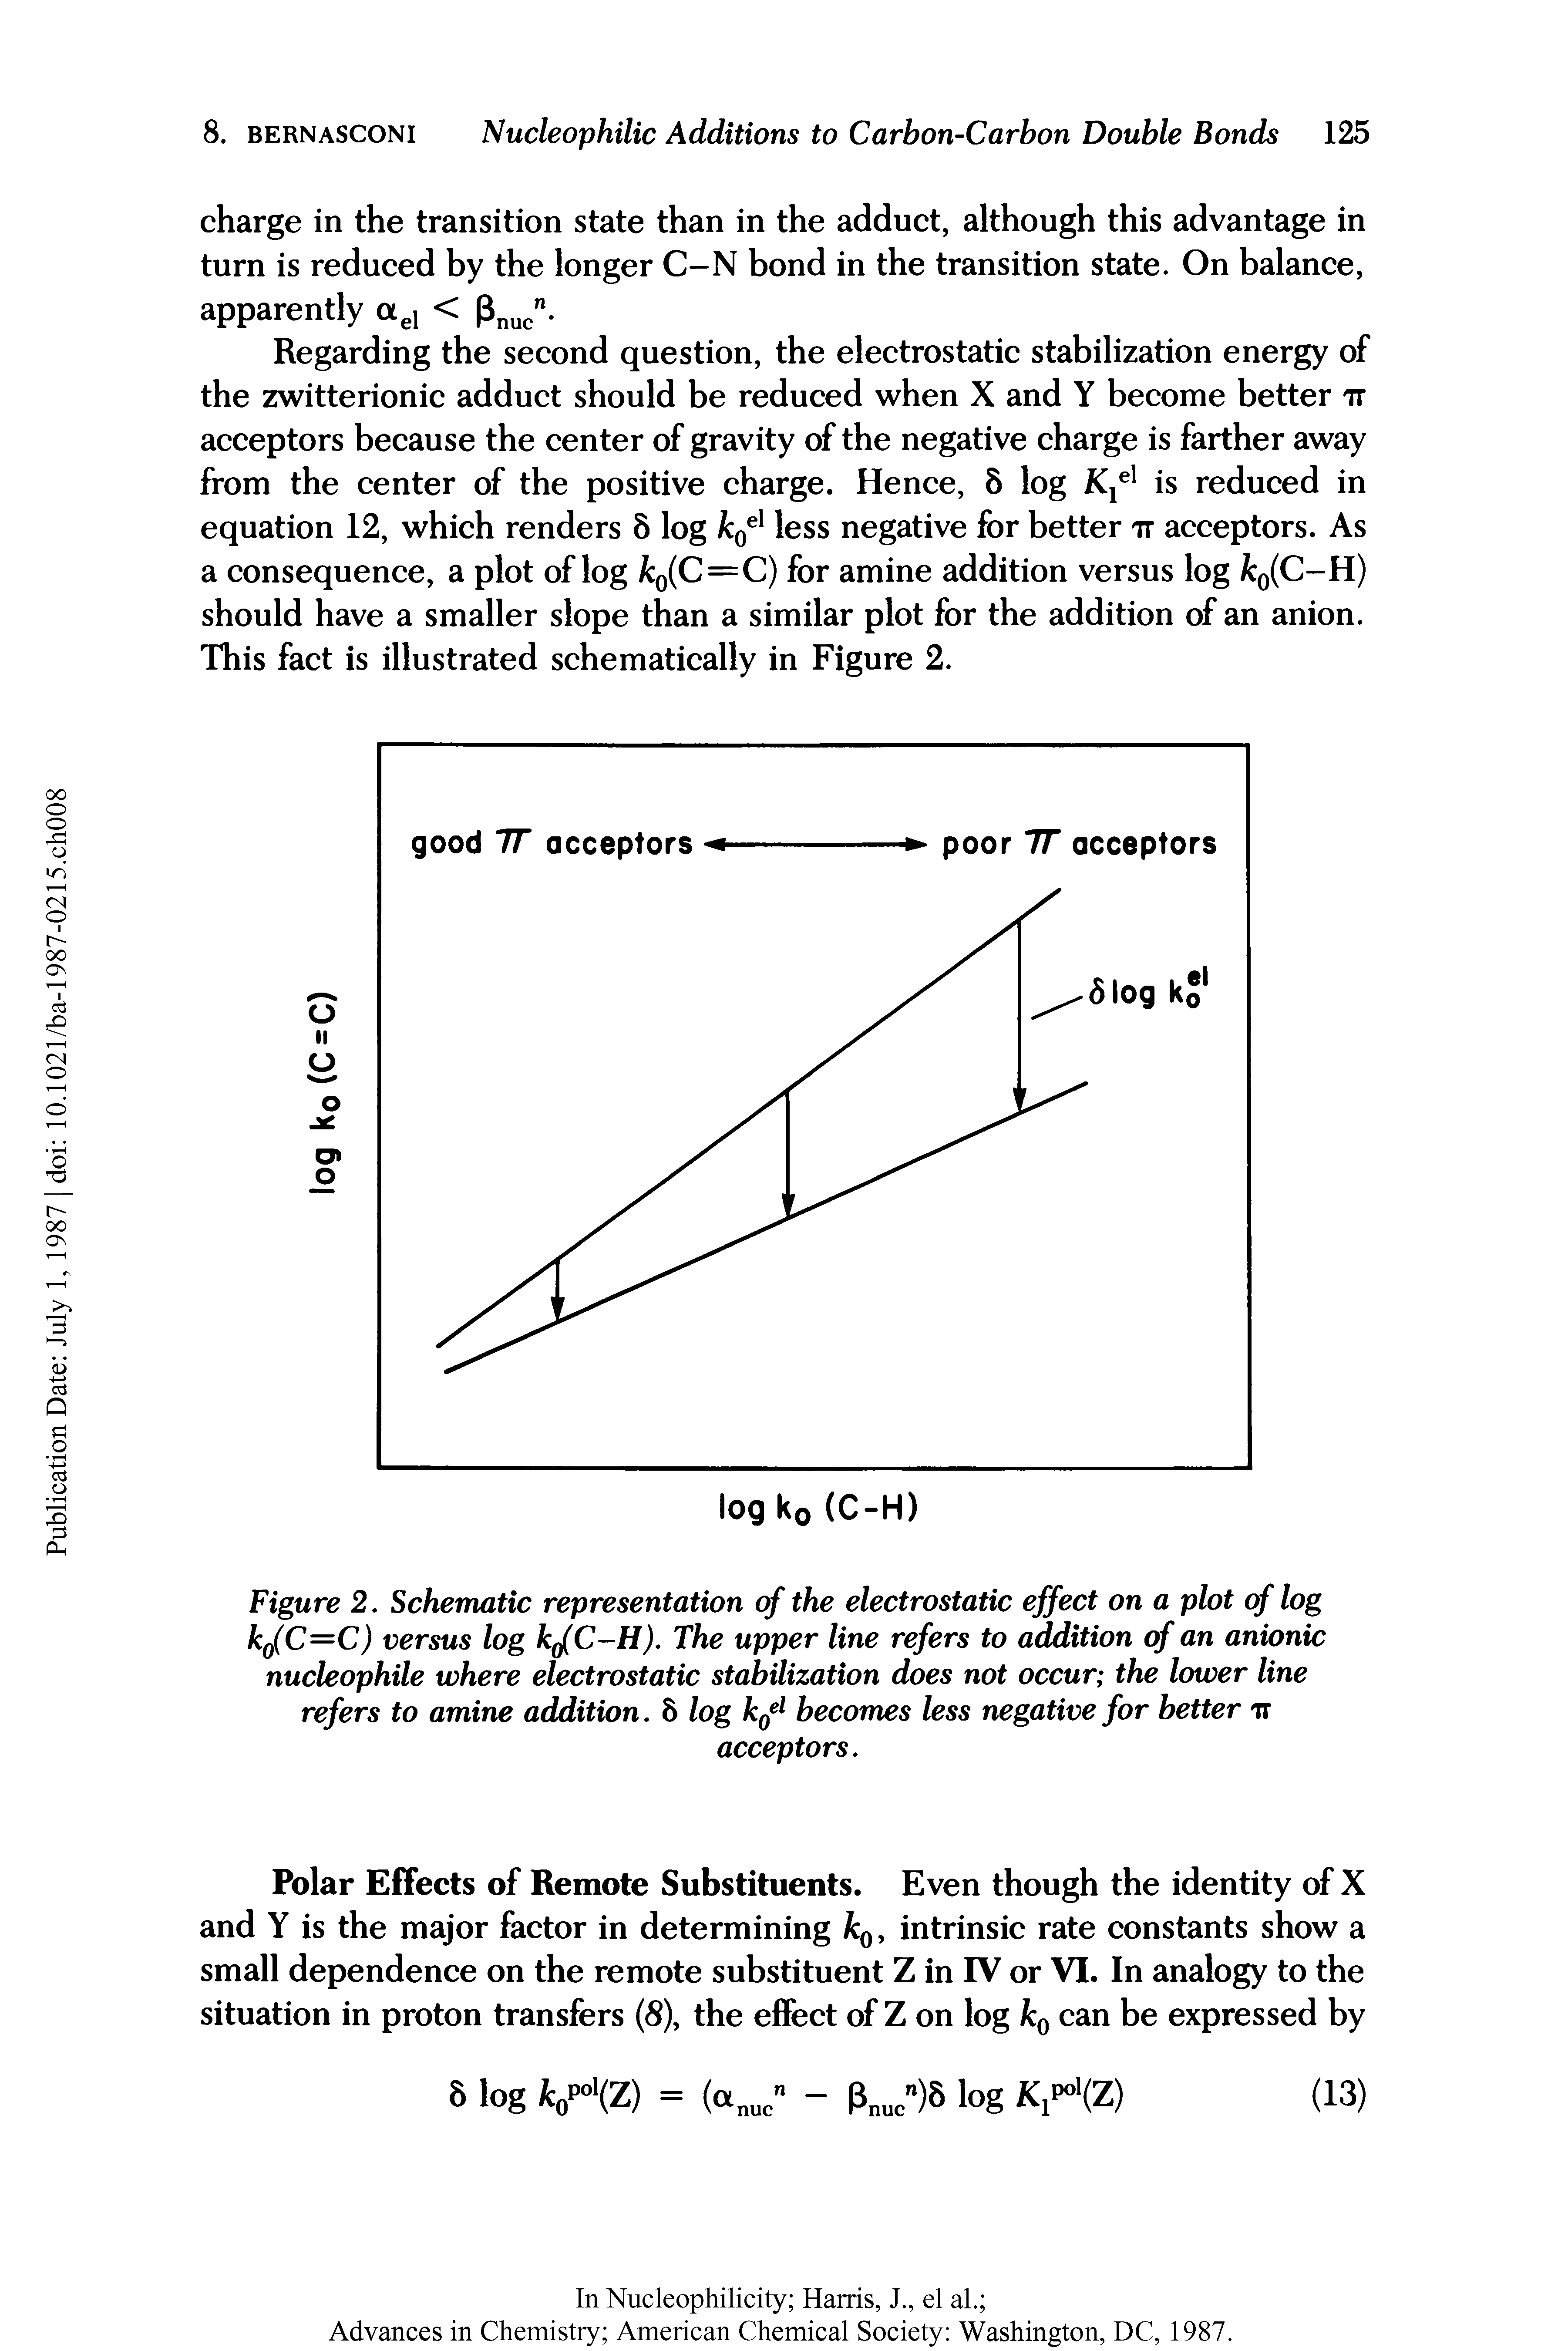 Figure 2. Schematic representation of the electrostatic effect on a plot of log k0(C=C) versus log k C-H). The upper line refers to addition of an anionic nucleophile where electrostatic stabilization does not occur the lower line refers to amine addition. 8 log k0el becomes less negative for better tt...